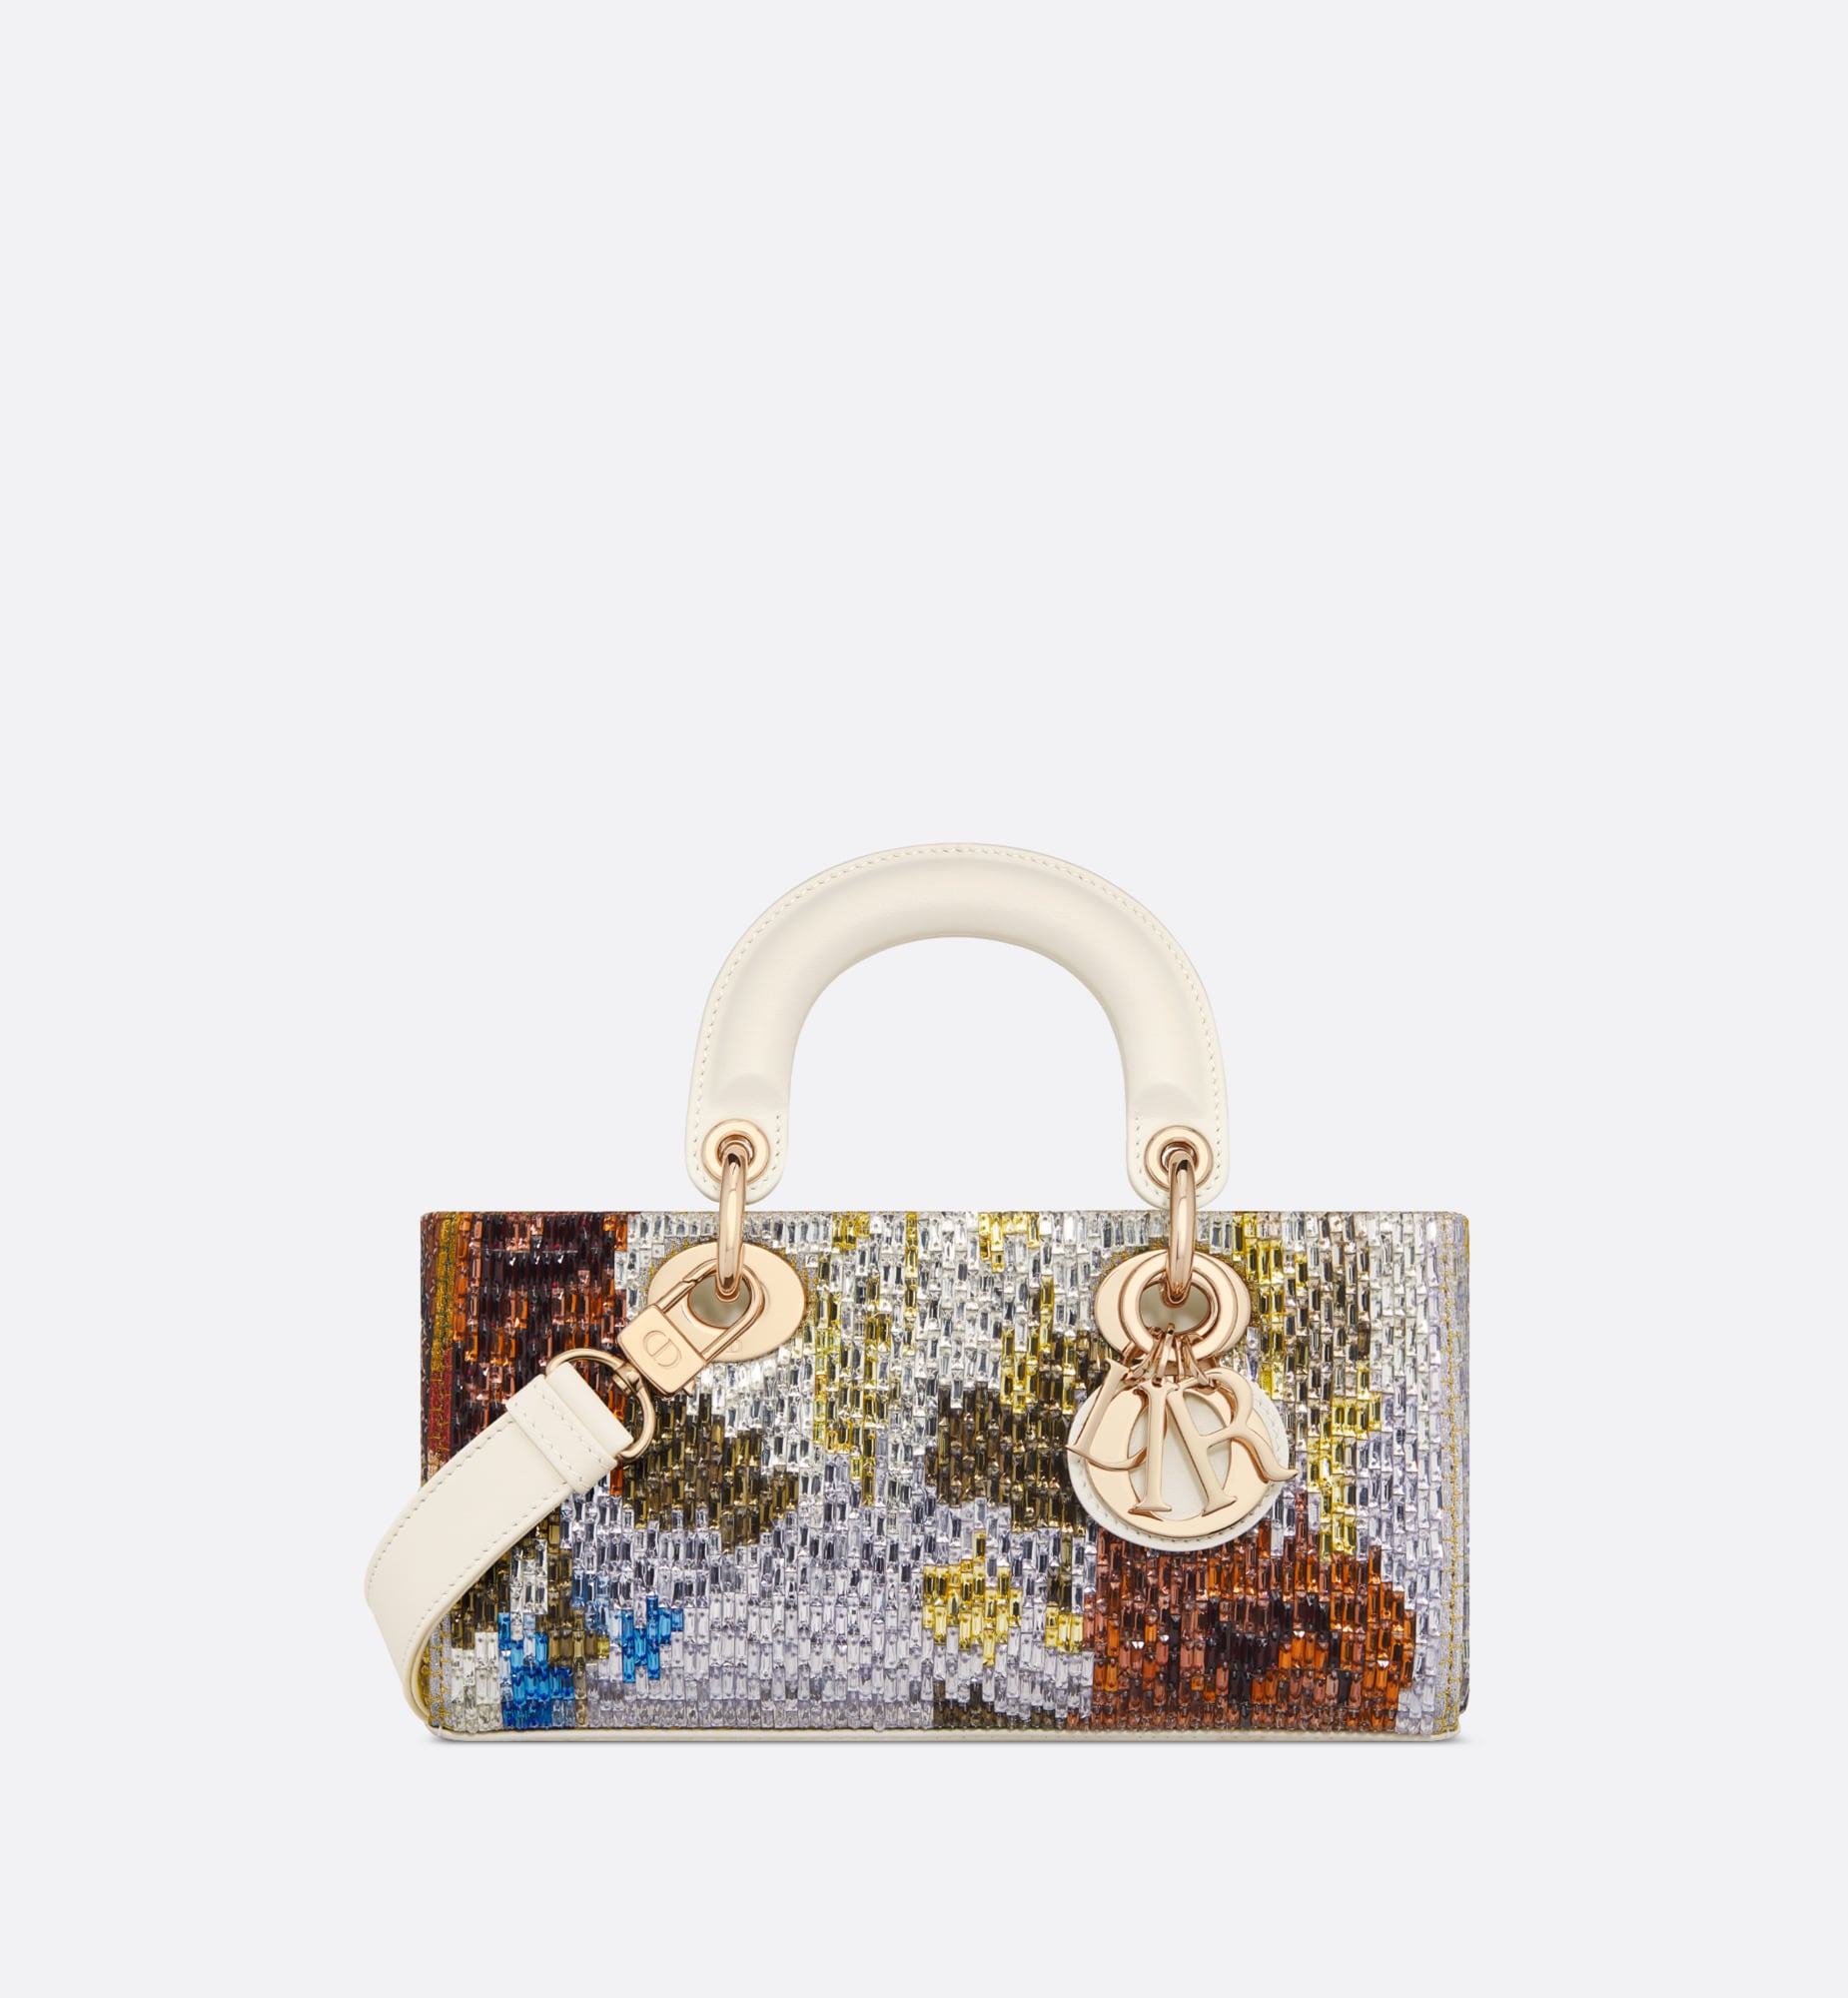 Small lady d-joy bag latte embroidery with glass bugle beads and multicolor blurred flowers corn motif dior joy bag